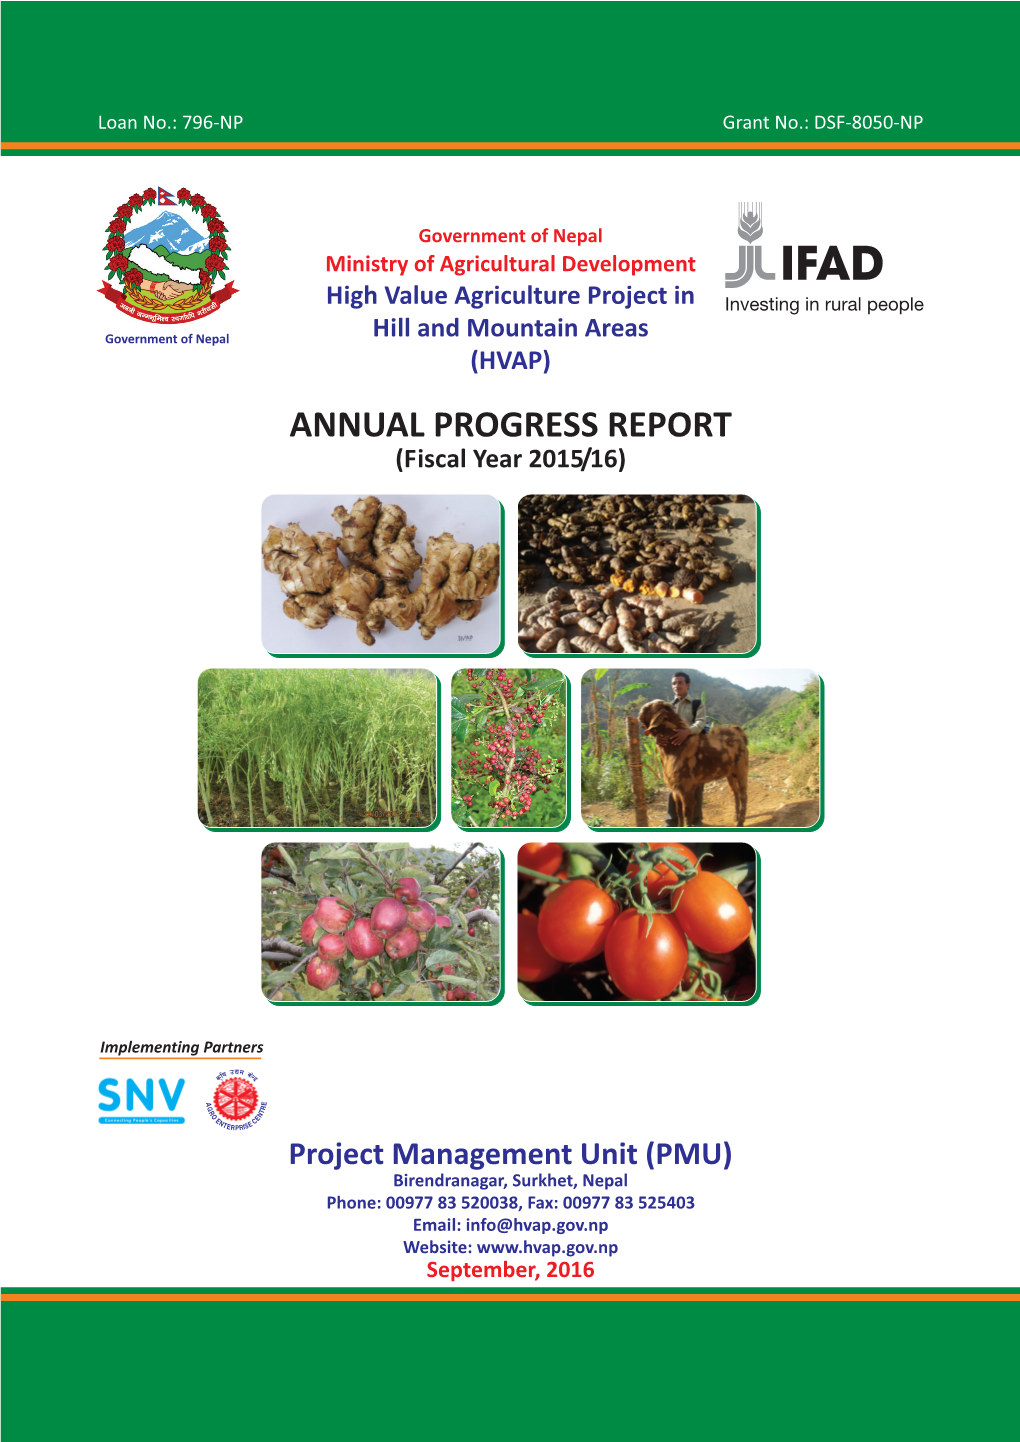 ANNUAL PROGRESS REPORT (Fiscal Year 2015/16)